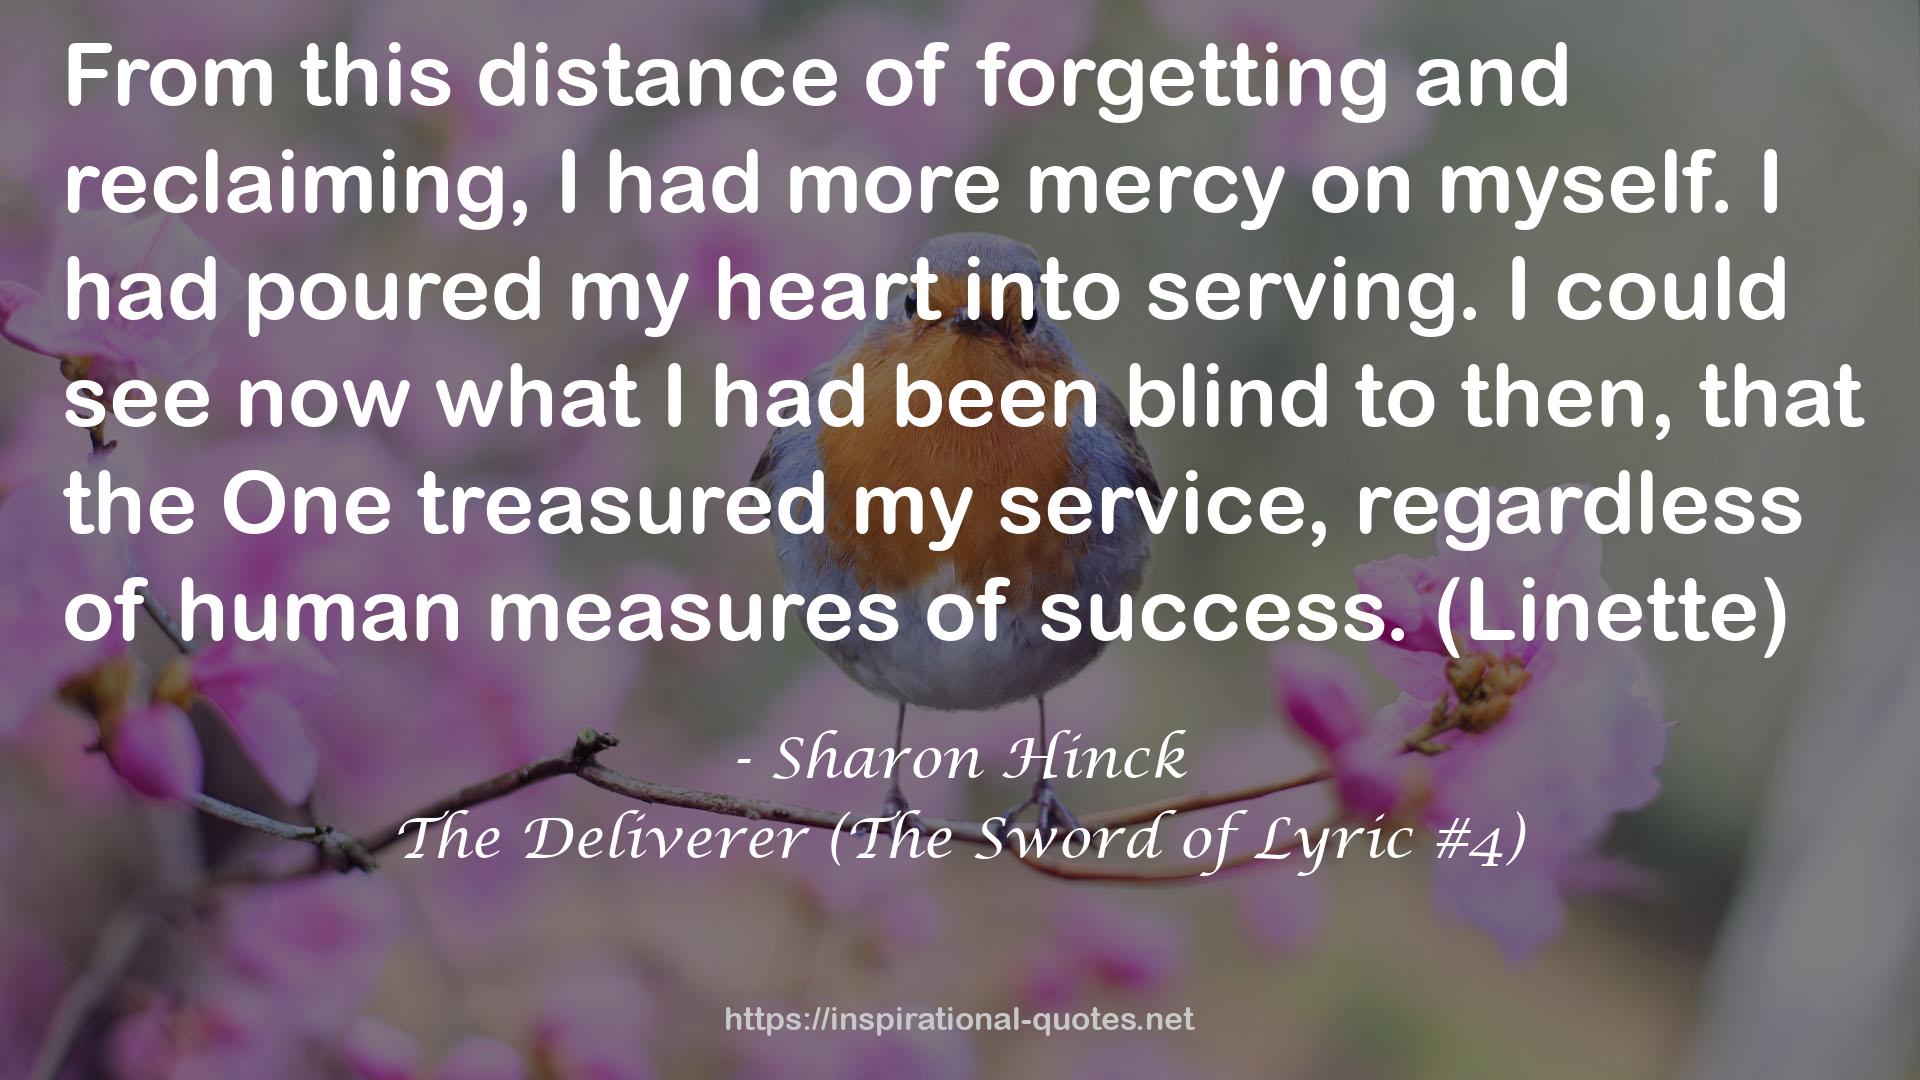 The Deliverer (The Sword of Lyric #4) QUOTES